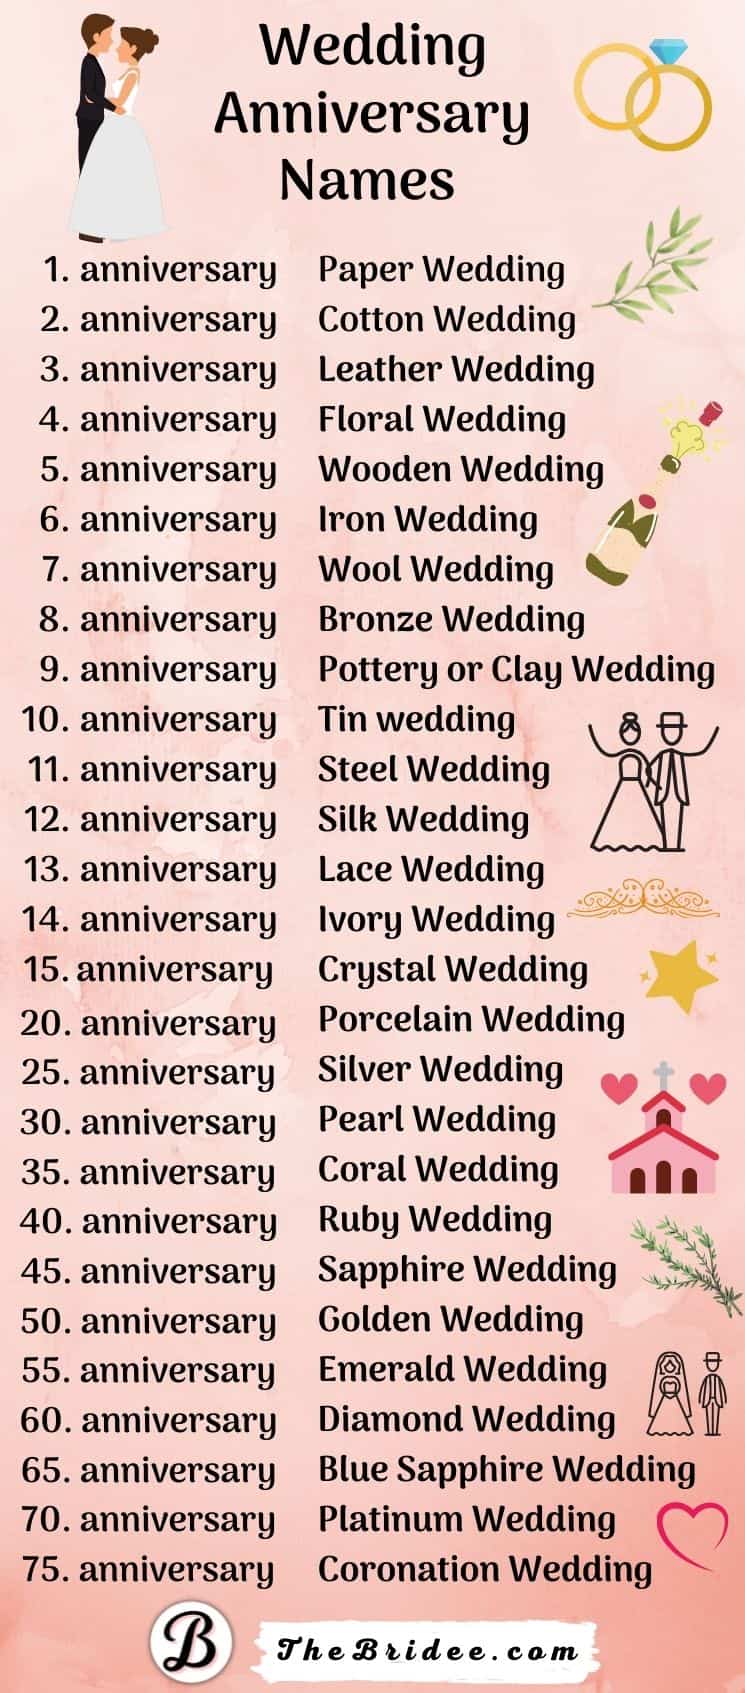 Wedding Anniversary Names by Year (+ Symbols, Flowers, Gifts)